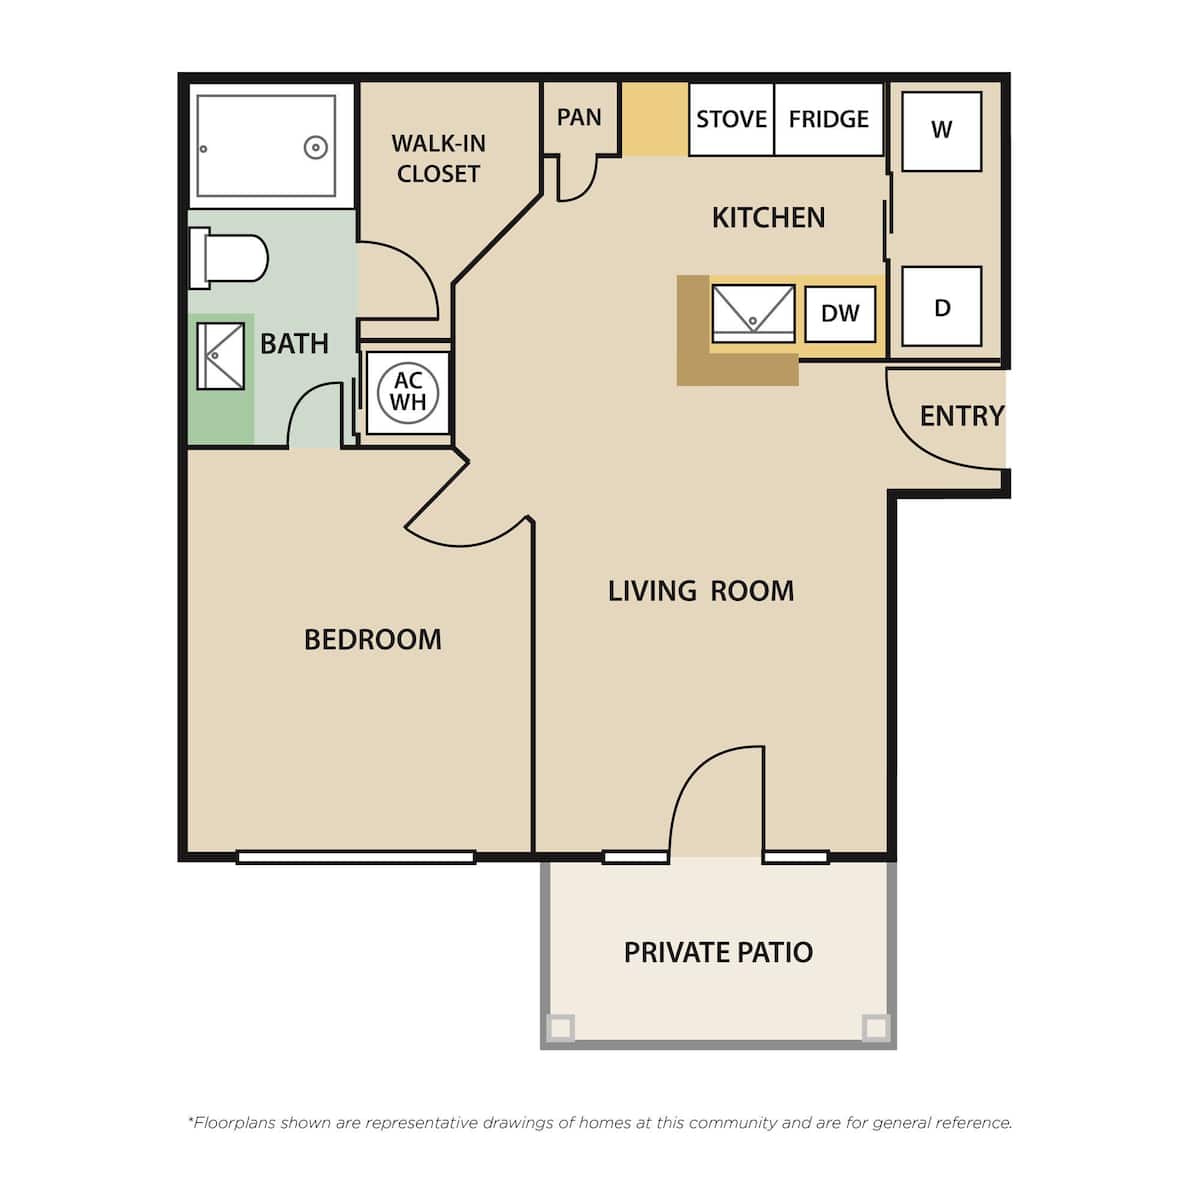 Floorplan diagram for SQUARE A1, showing 1 bedroom